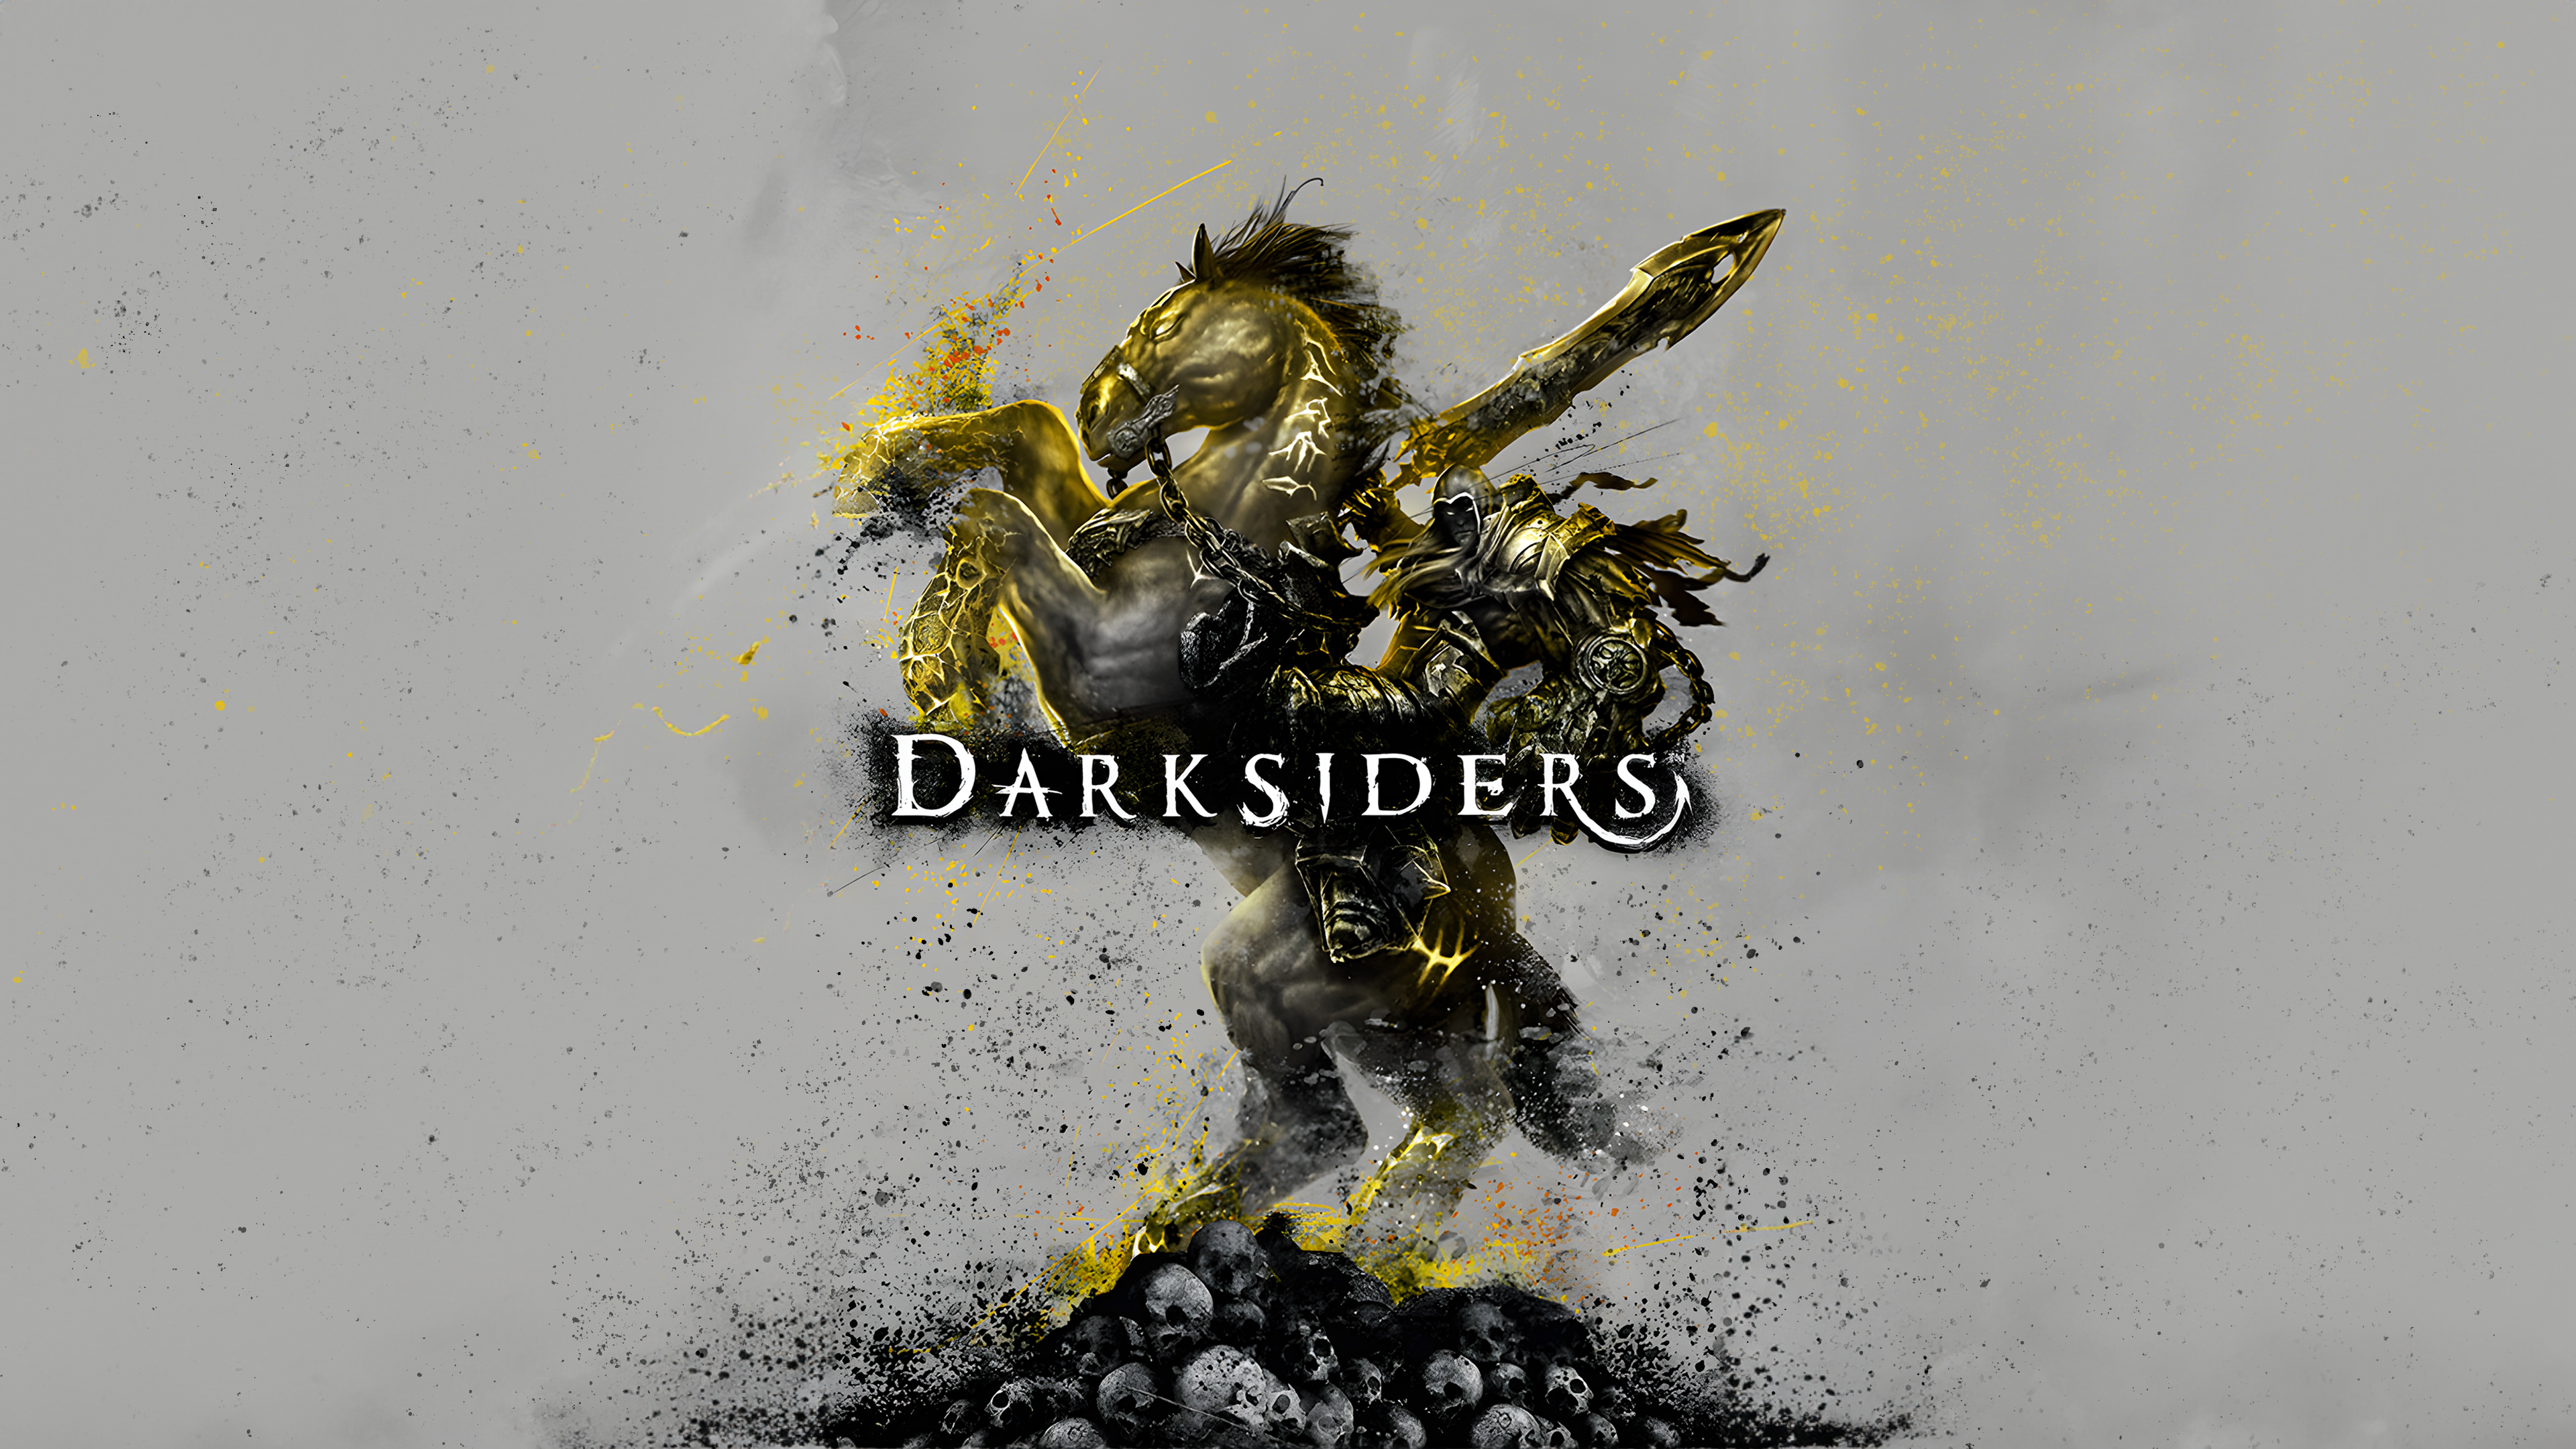 Darksiders War Darksiders Greatsword Cape Chains Ash Particles Simple Background Horse Minimalism Ho 3840x2160